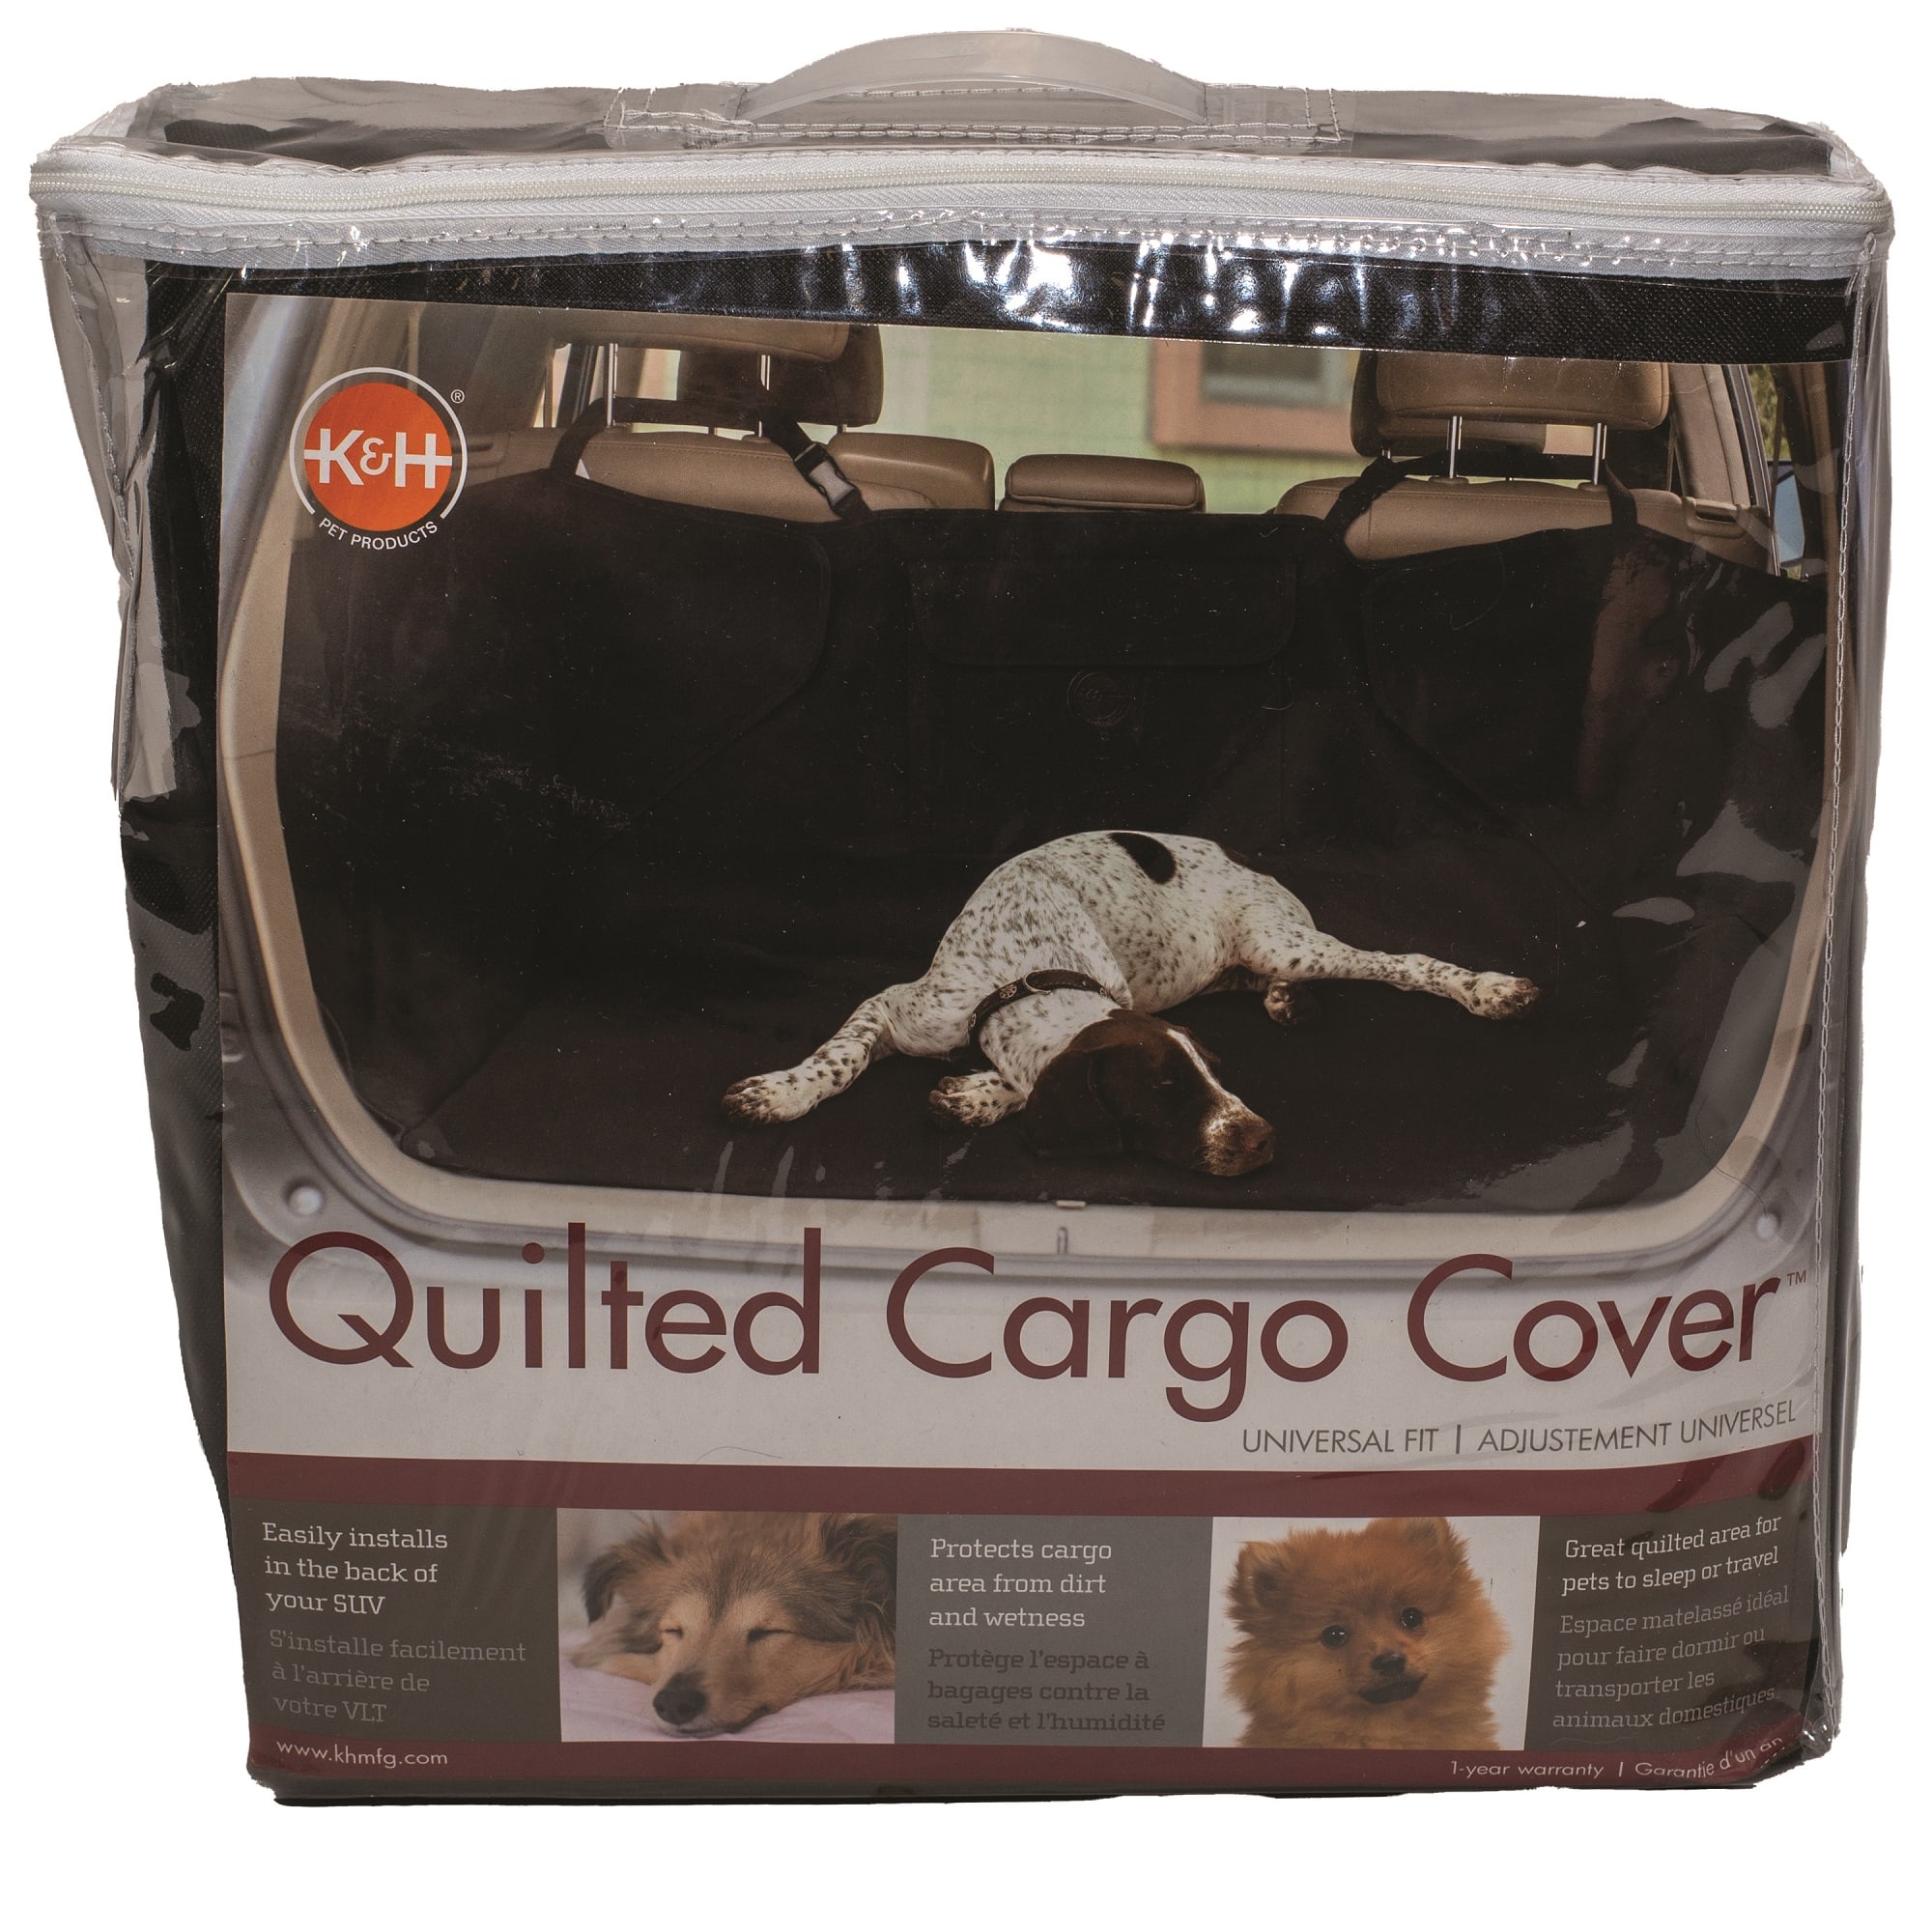 Photos - Car Seat Accessory K&H Quilted Cargo Black Cover for Pets, 52" L X 40" W X 18" H, 52 IN, 